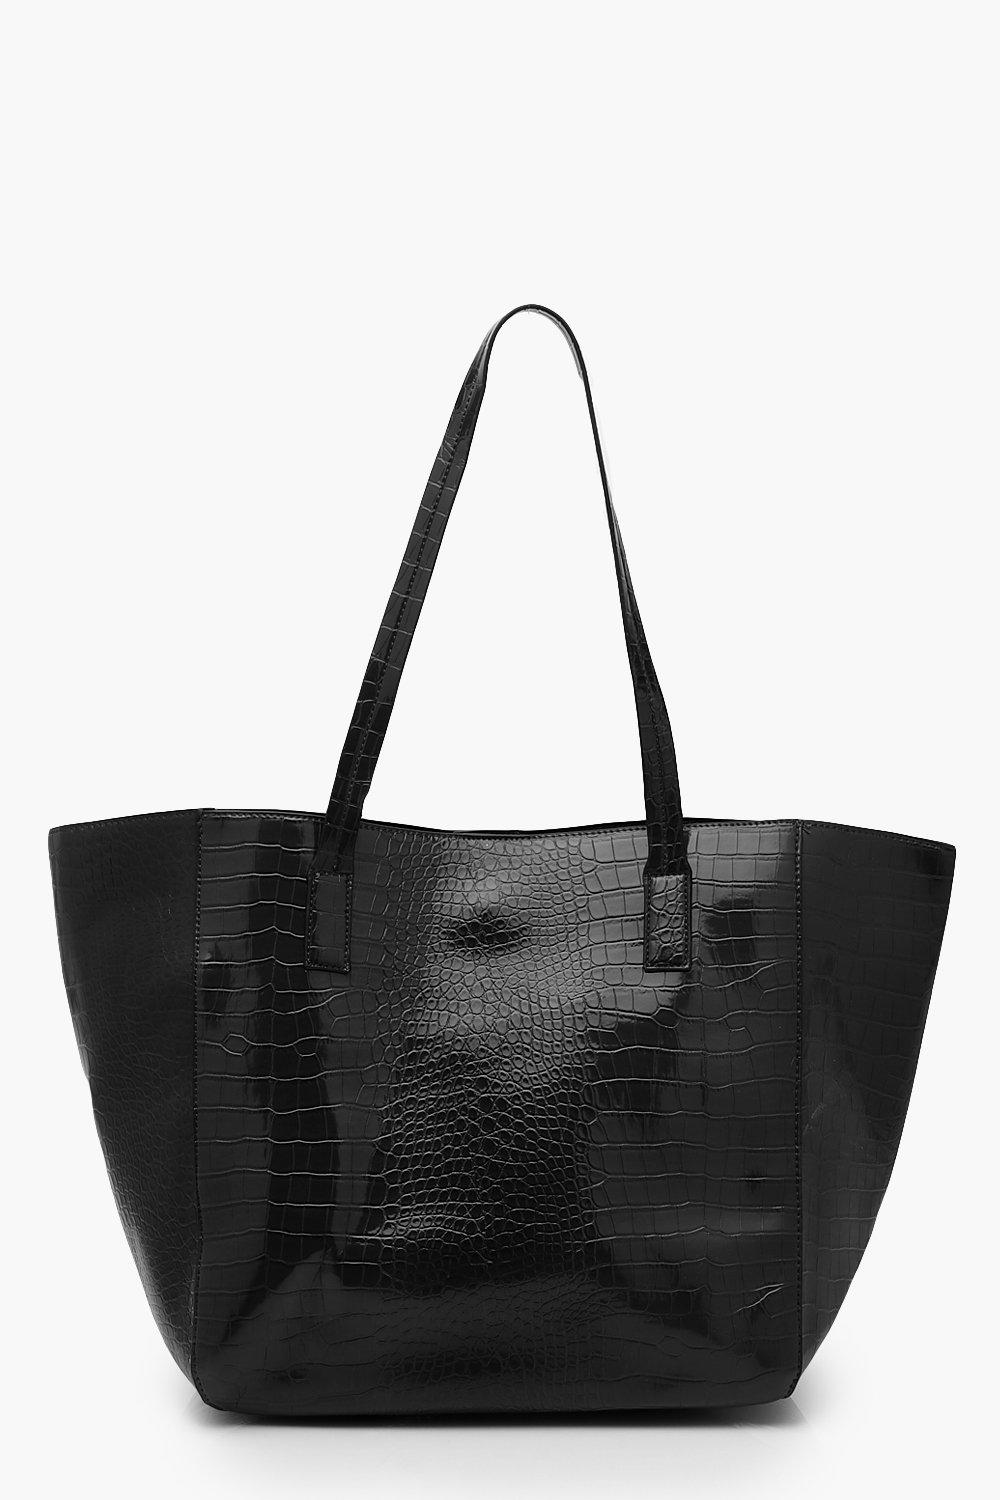 womens oversized faux leather croc tote day bag - black - one size, black